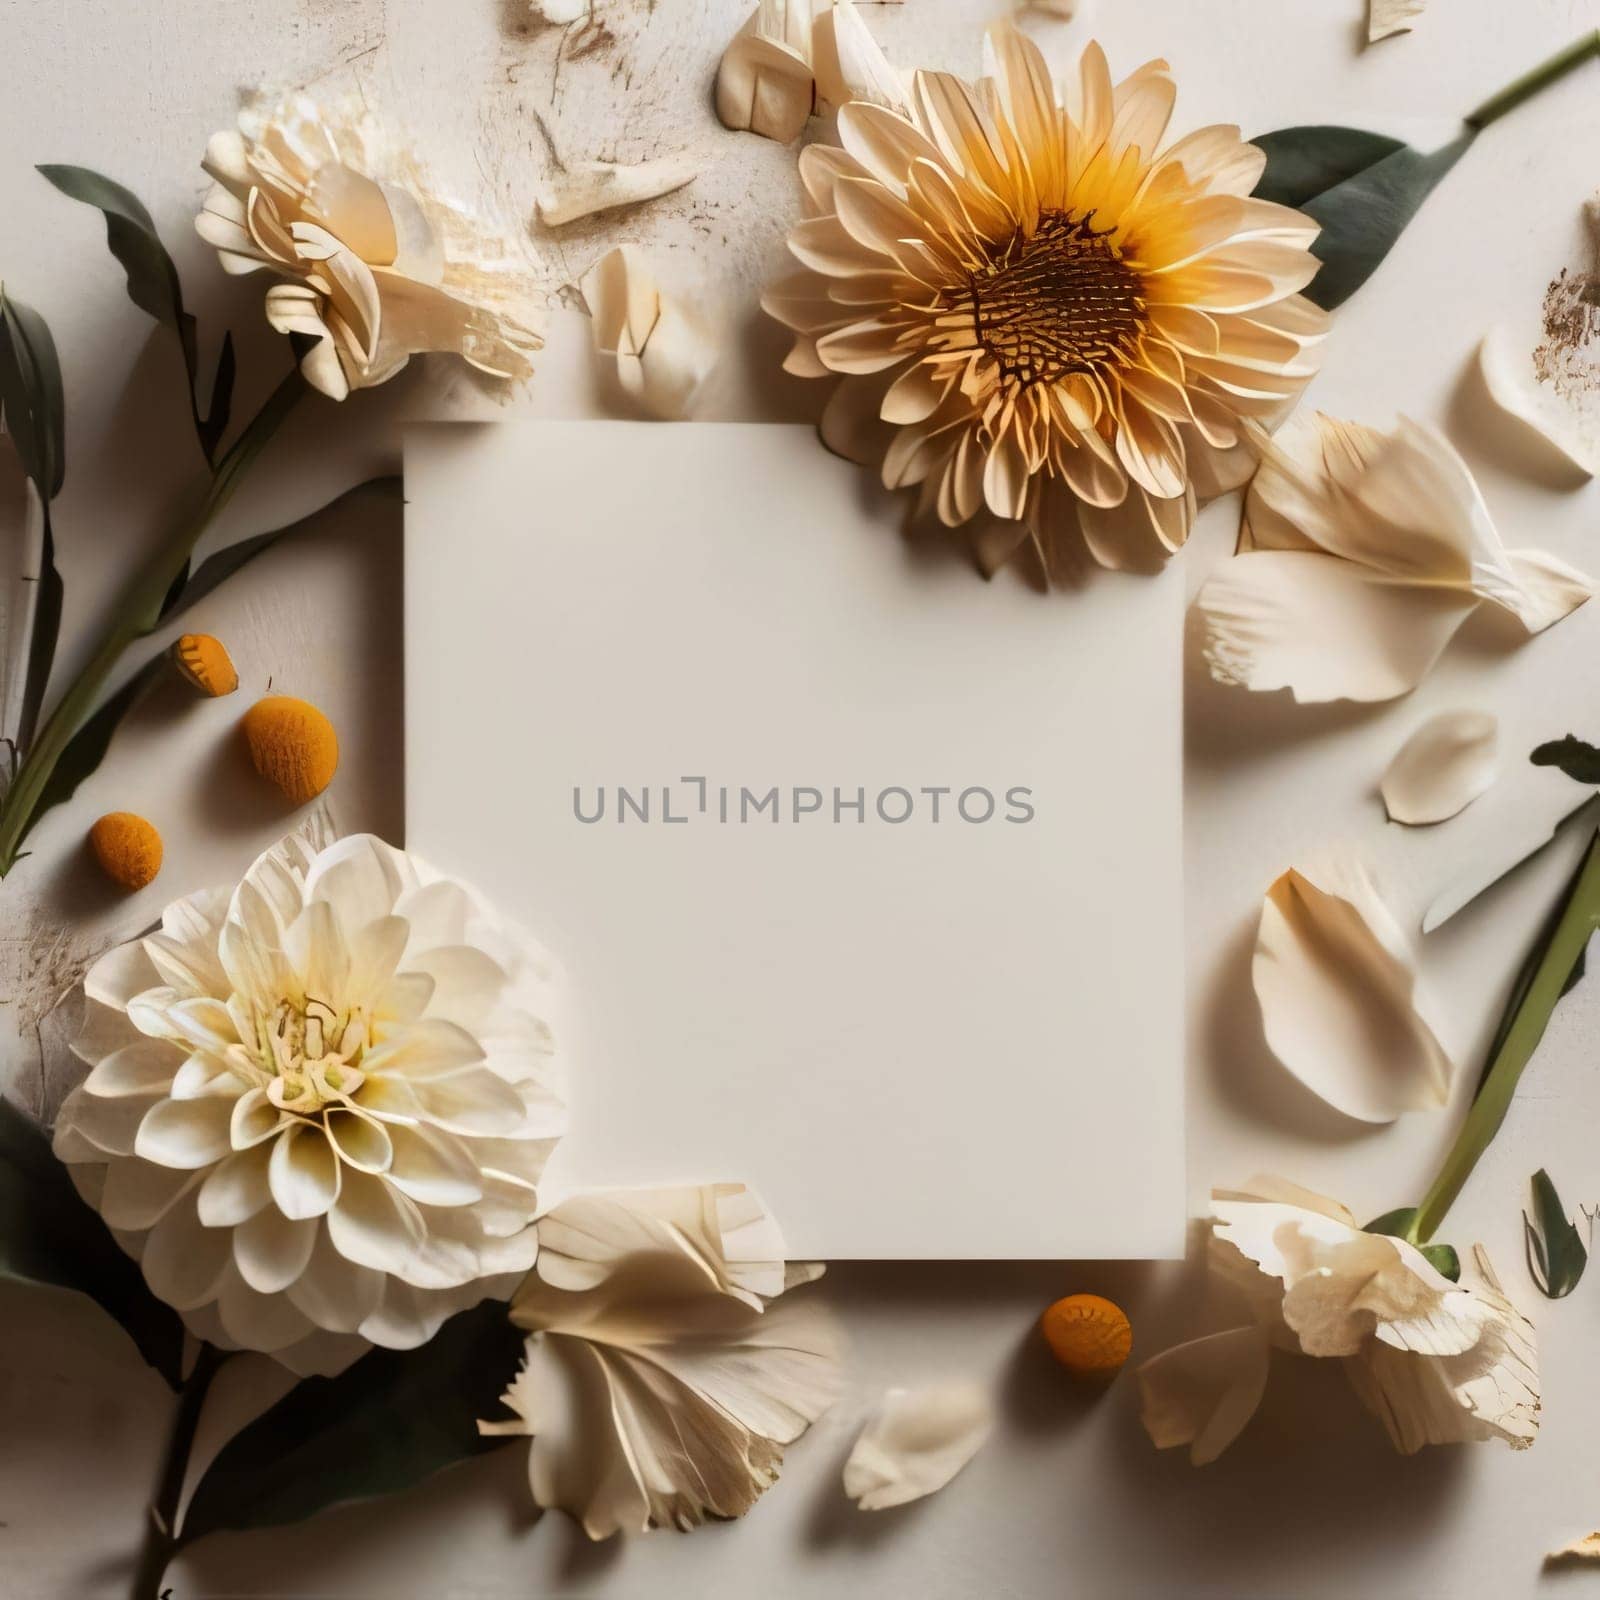 White blank card on a white background around scattered white flower petals. Places on their own content. Flowering flowers, a symbol of spring, new life. by ThemesS